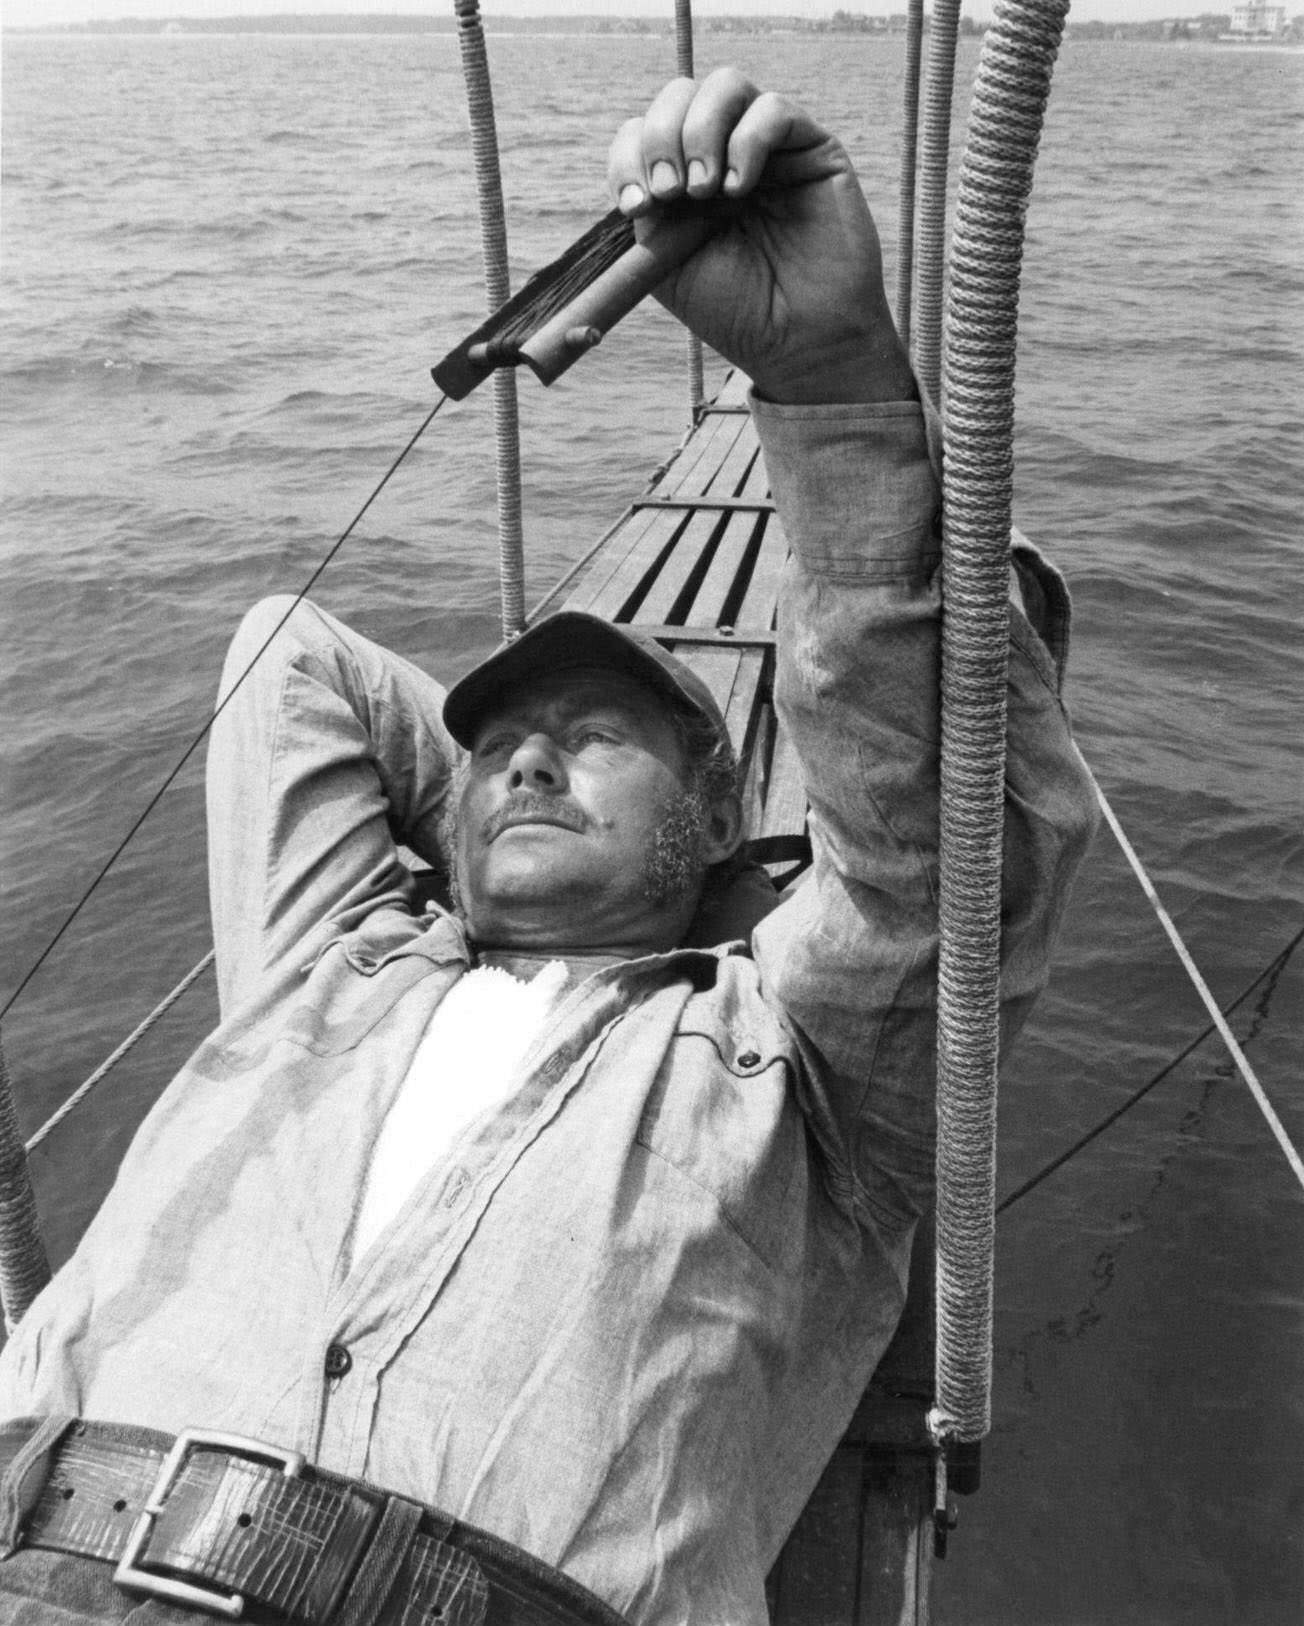 Robert Shaw lying down in boat in a scene from the film 'Jaws', 1975.